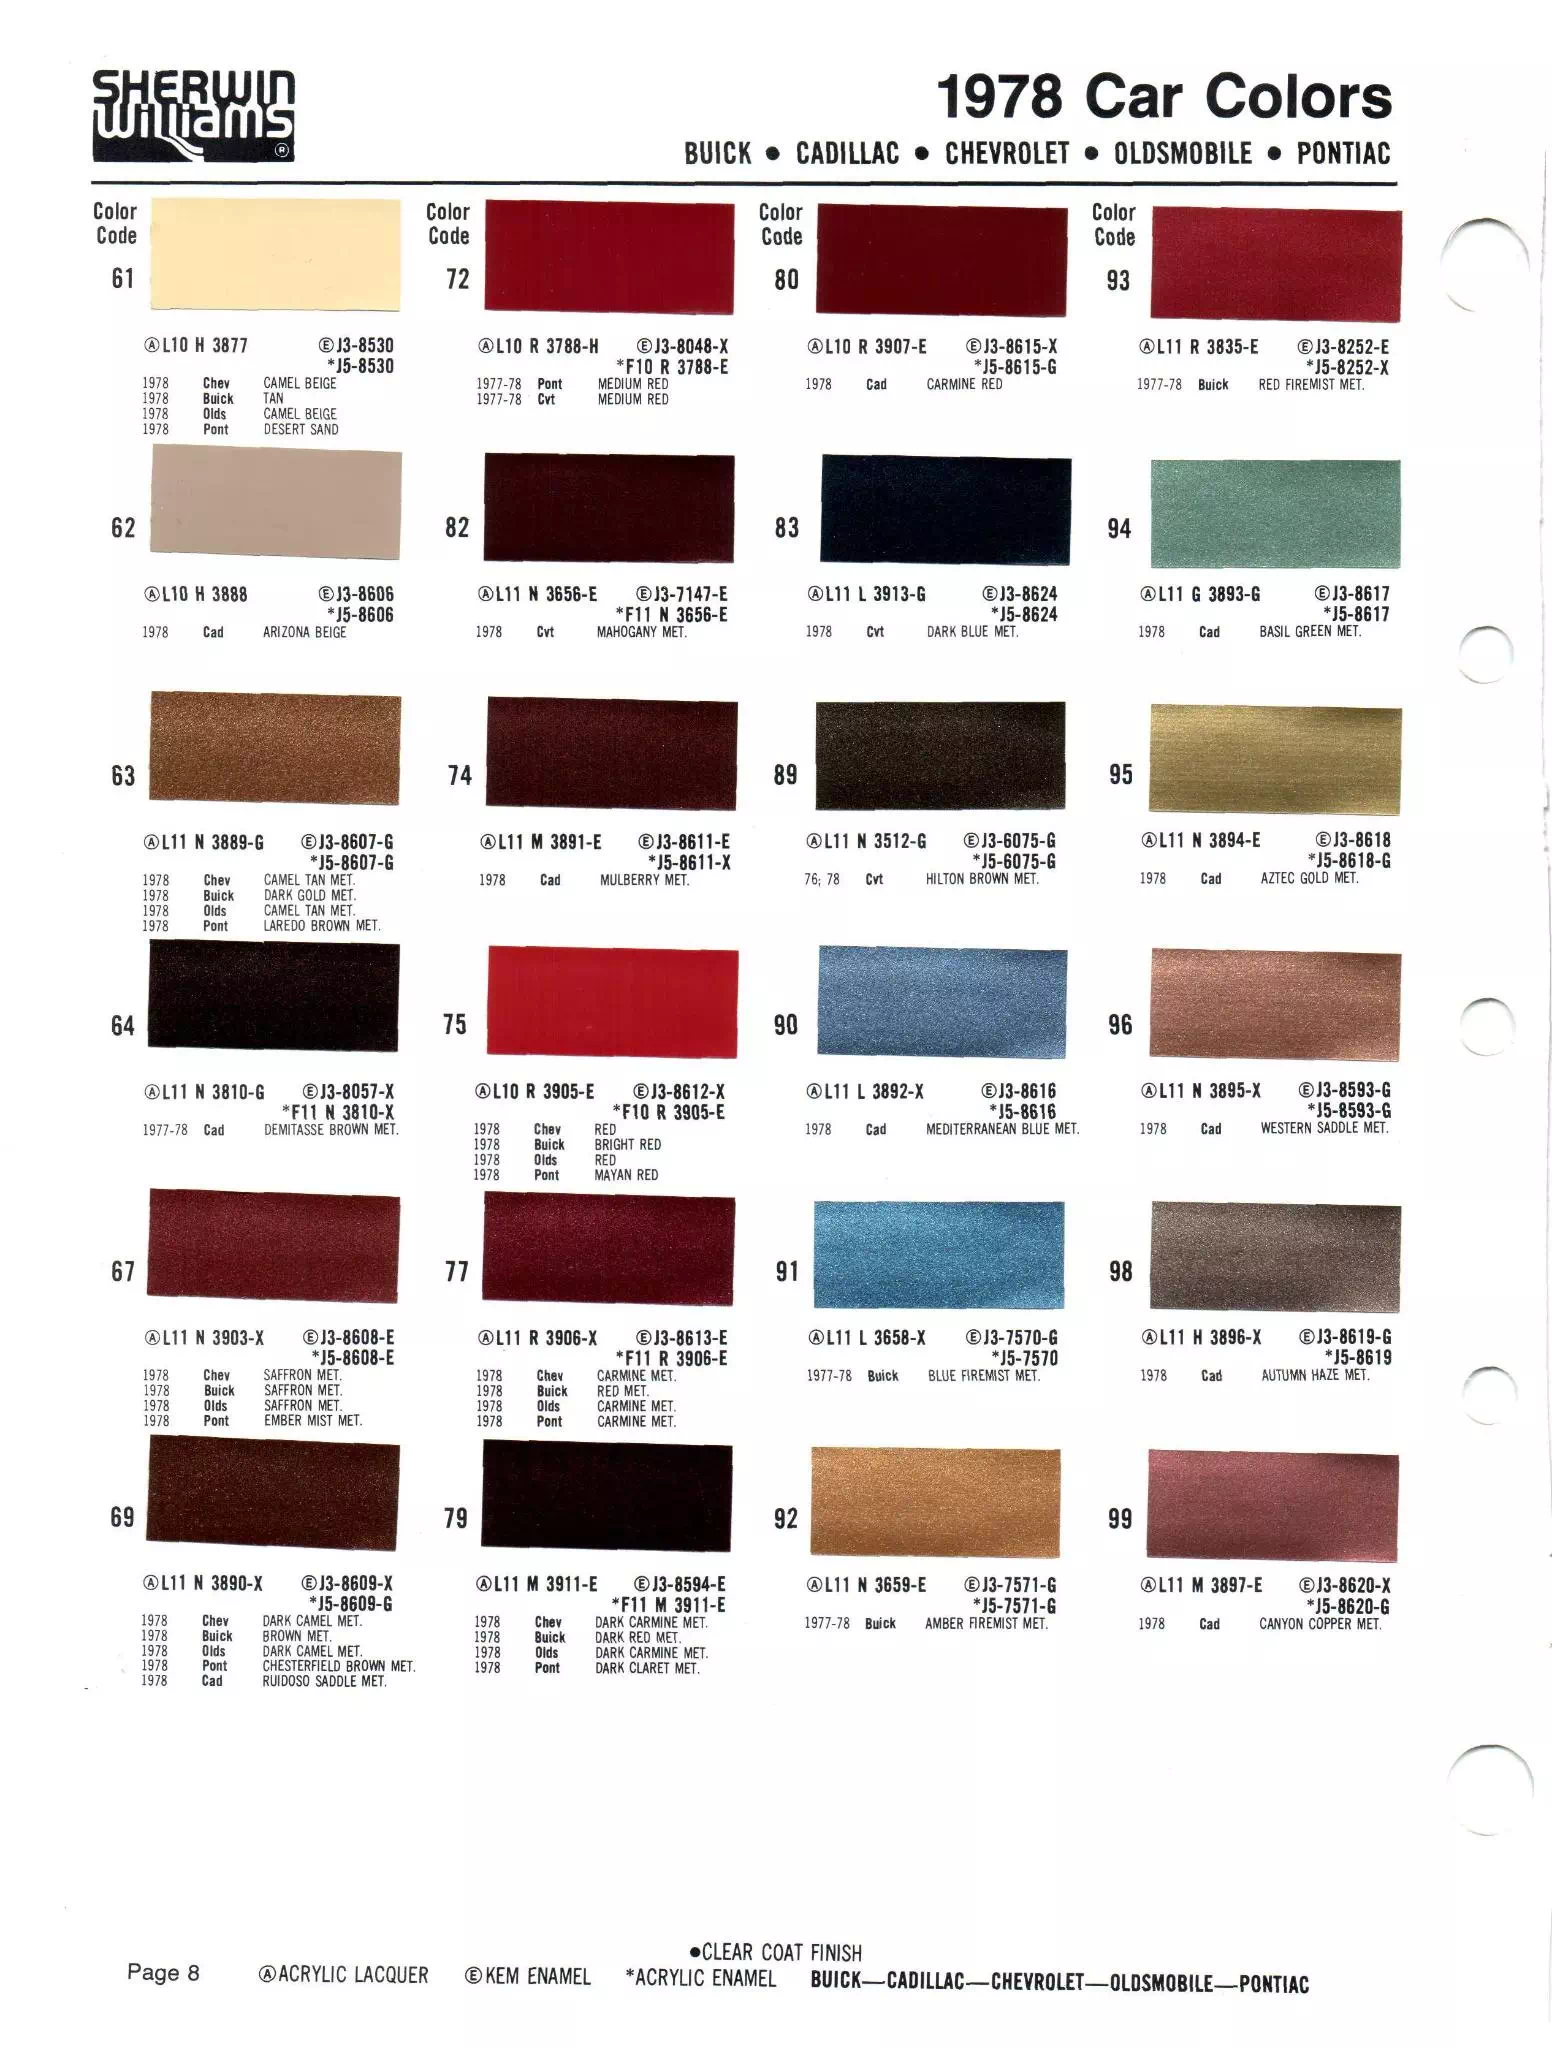 Colors, Descriptions, Codes, and Paint Swatches for General Motors Vehicles in 1978